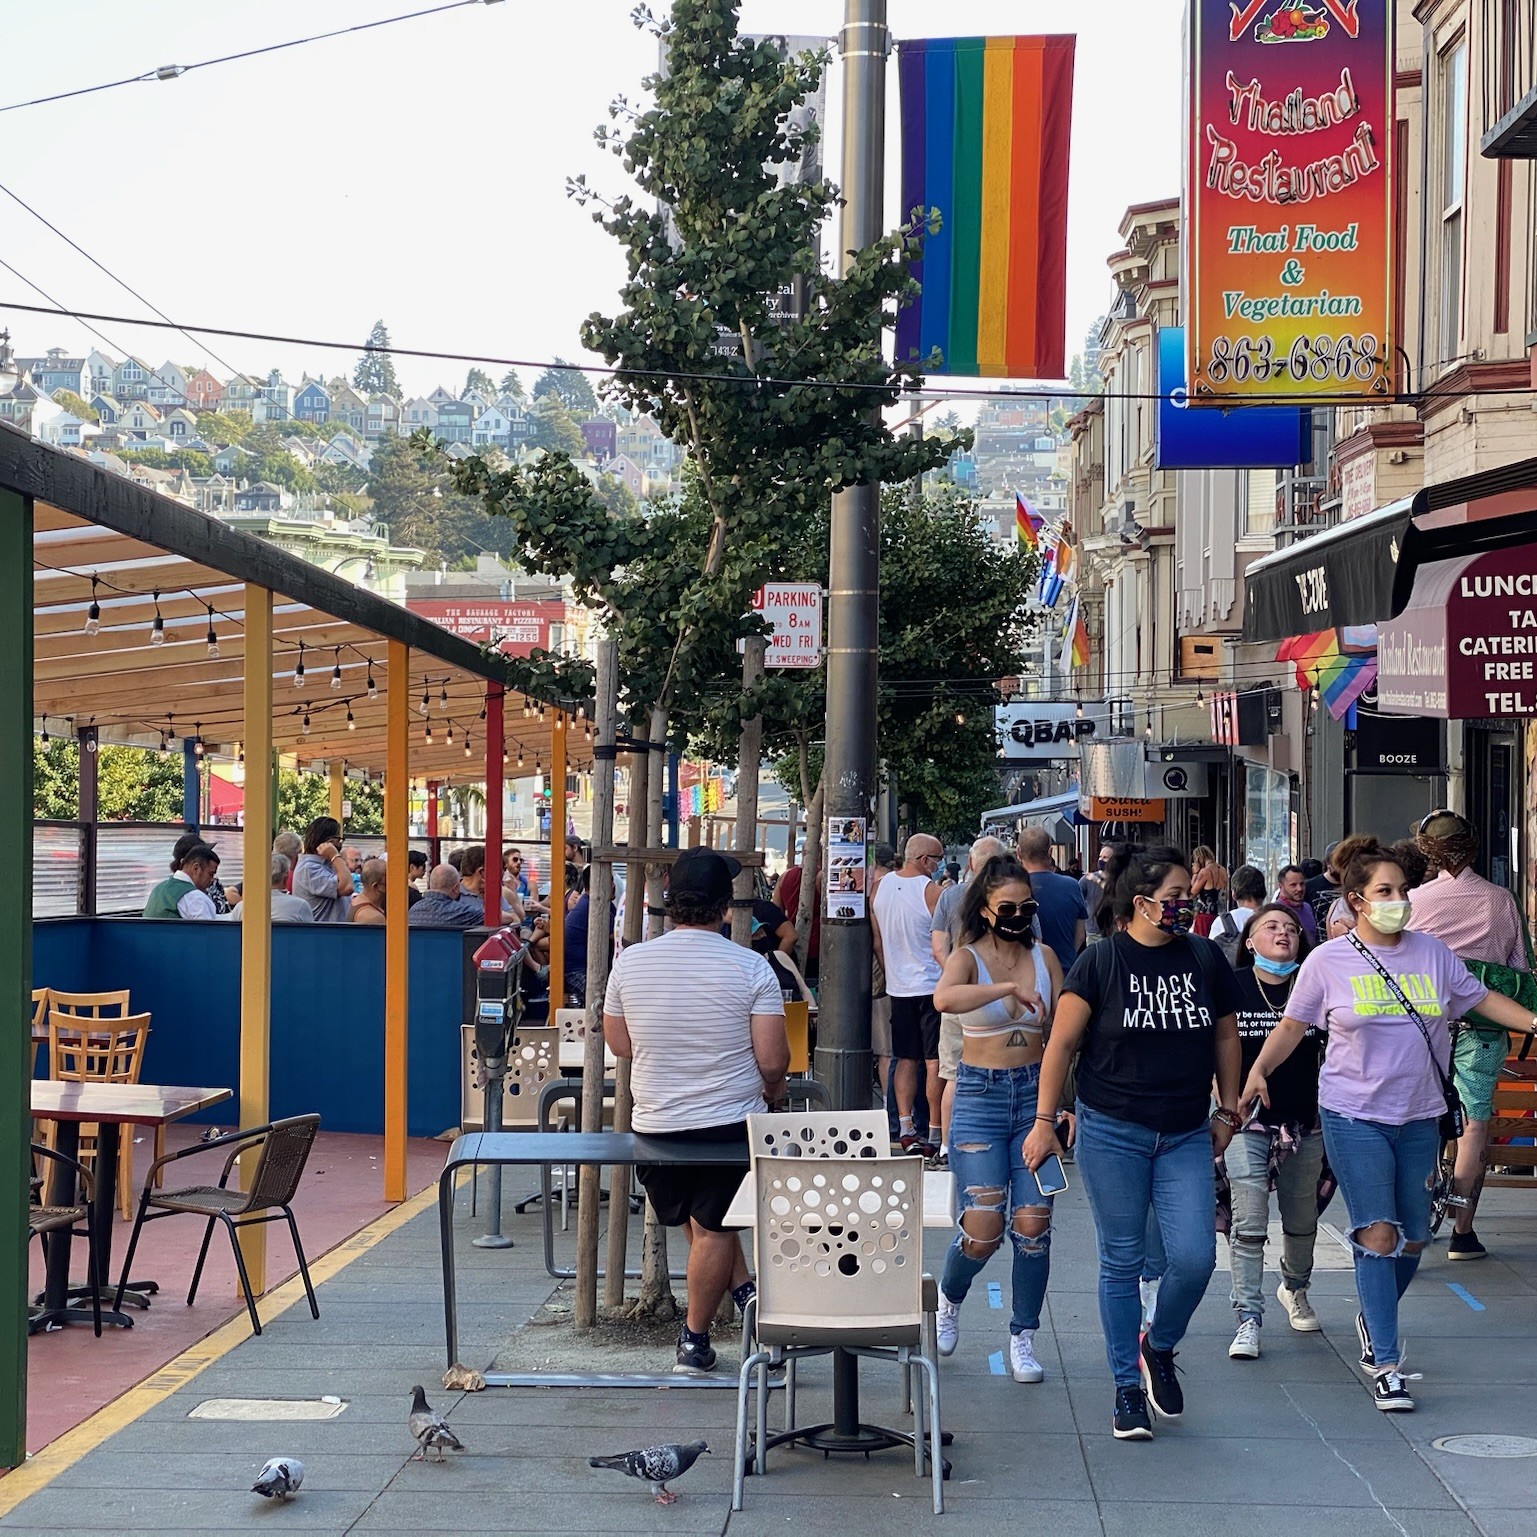 Pedestrians walk past restaurants and cafes in the Castro District of San Francisco